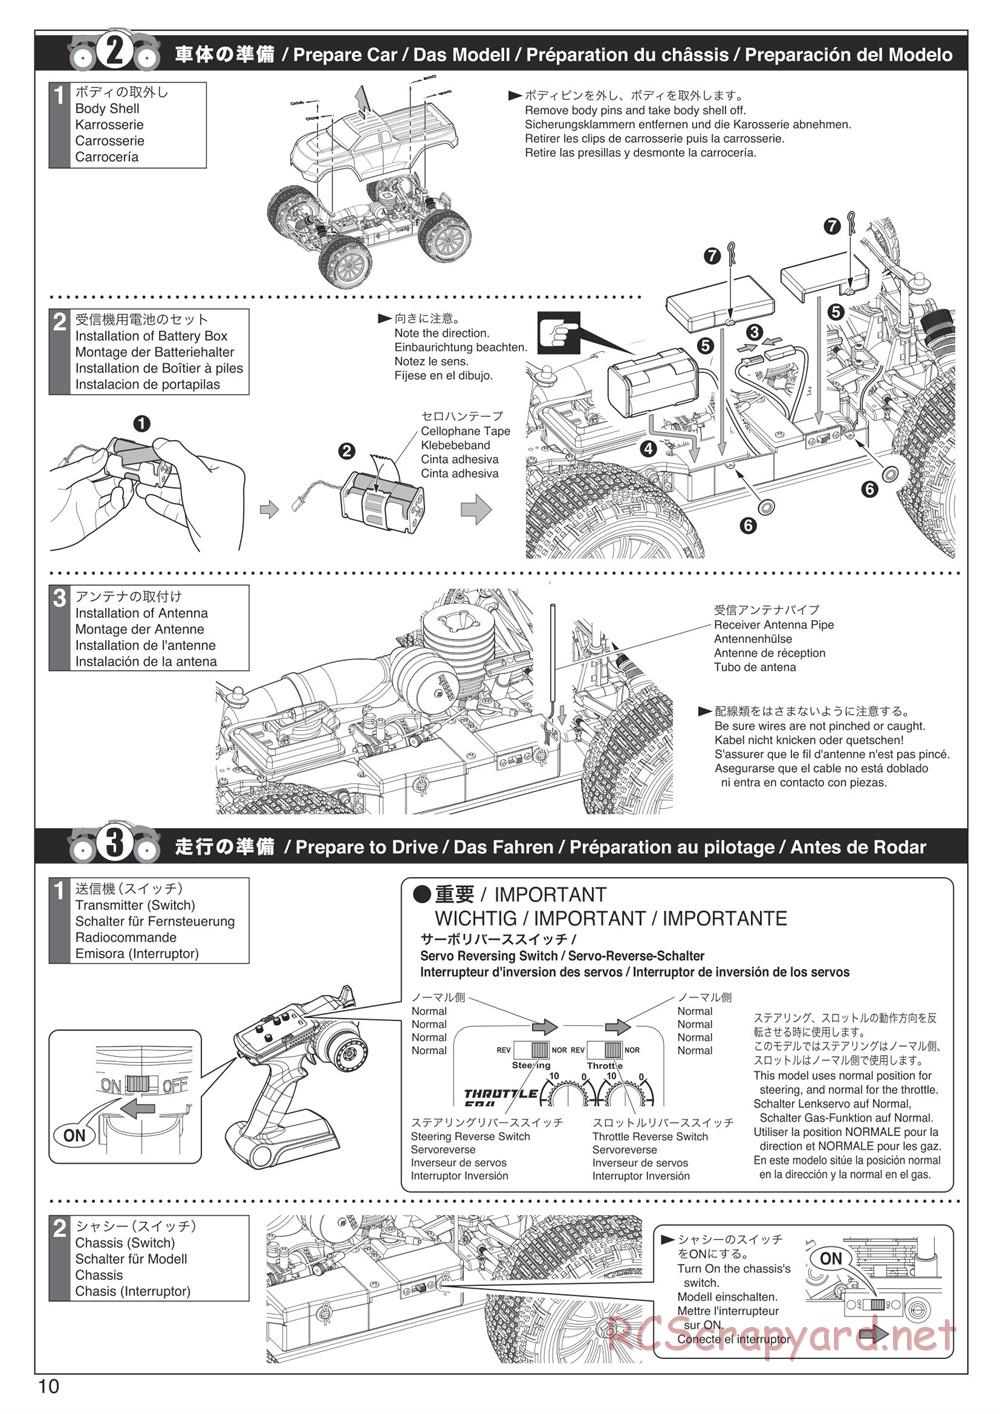 Kyosho - DMT - Manual - Page 10